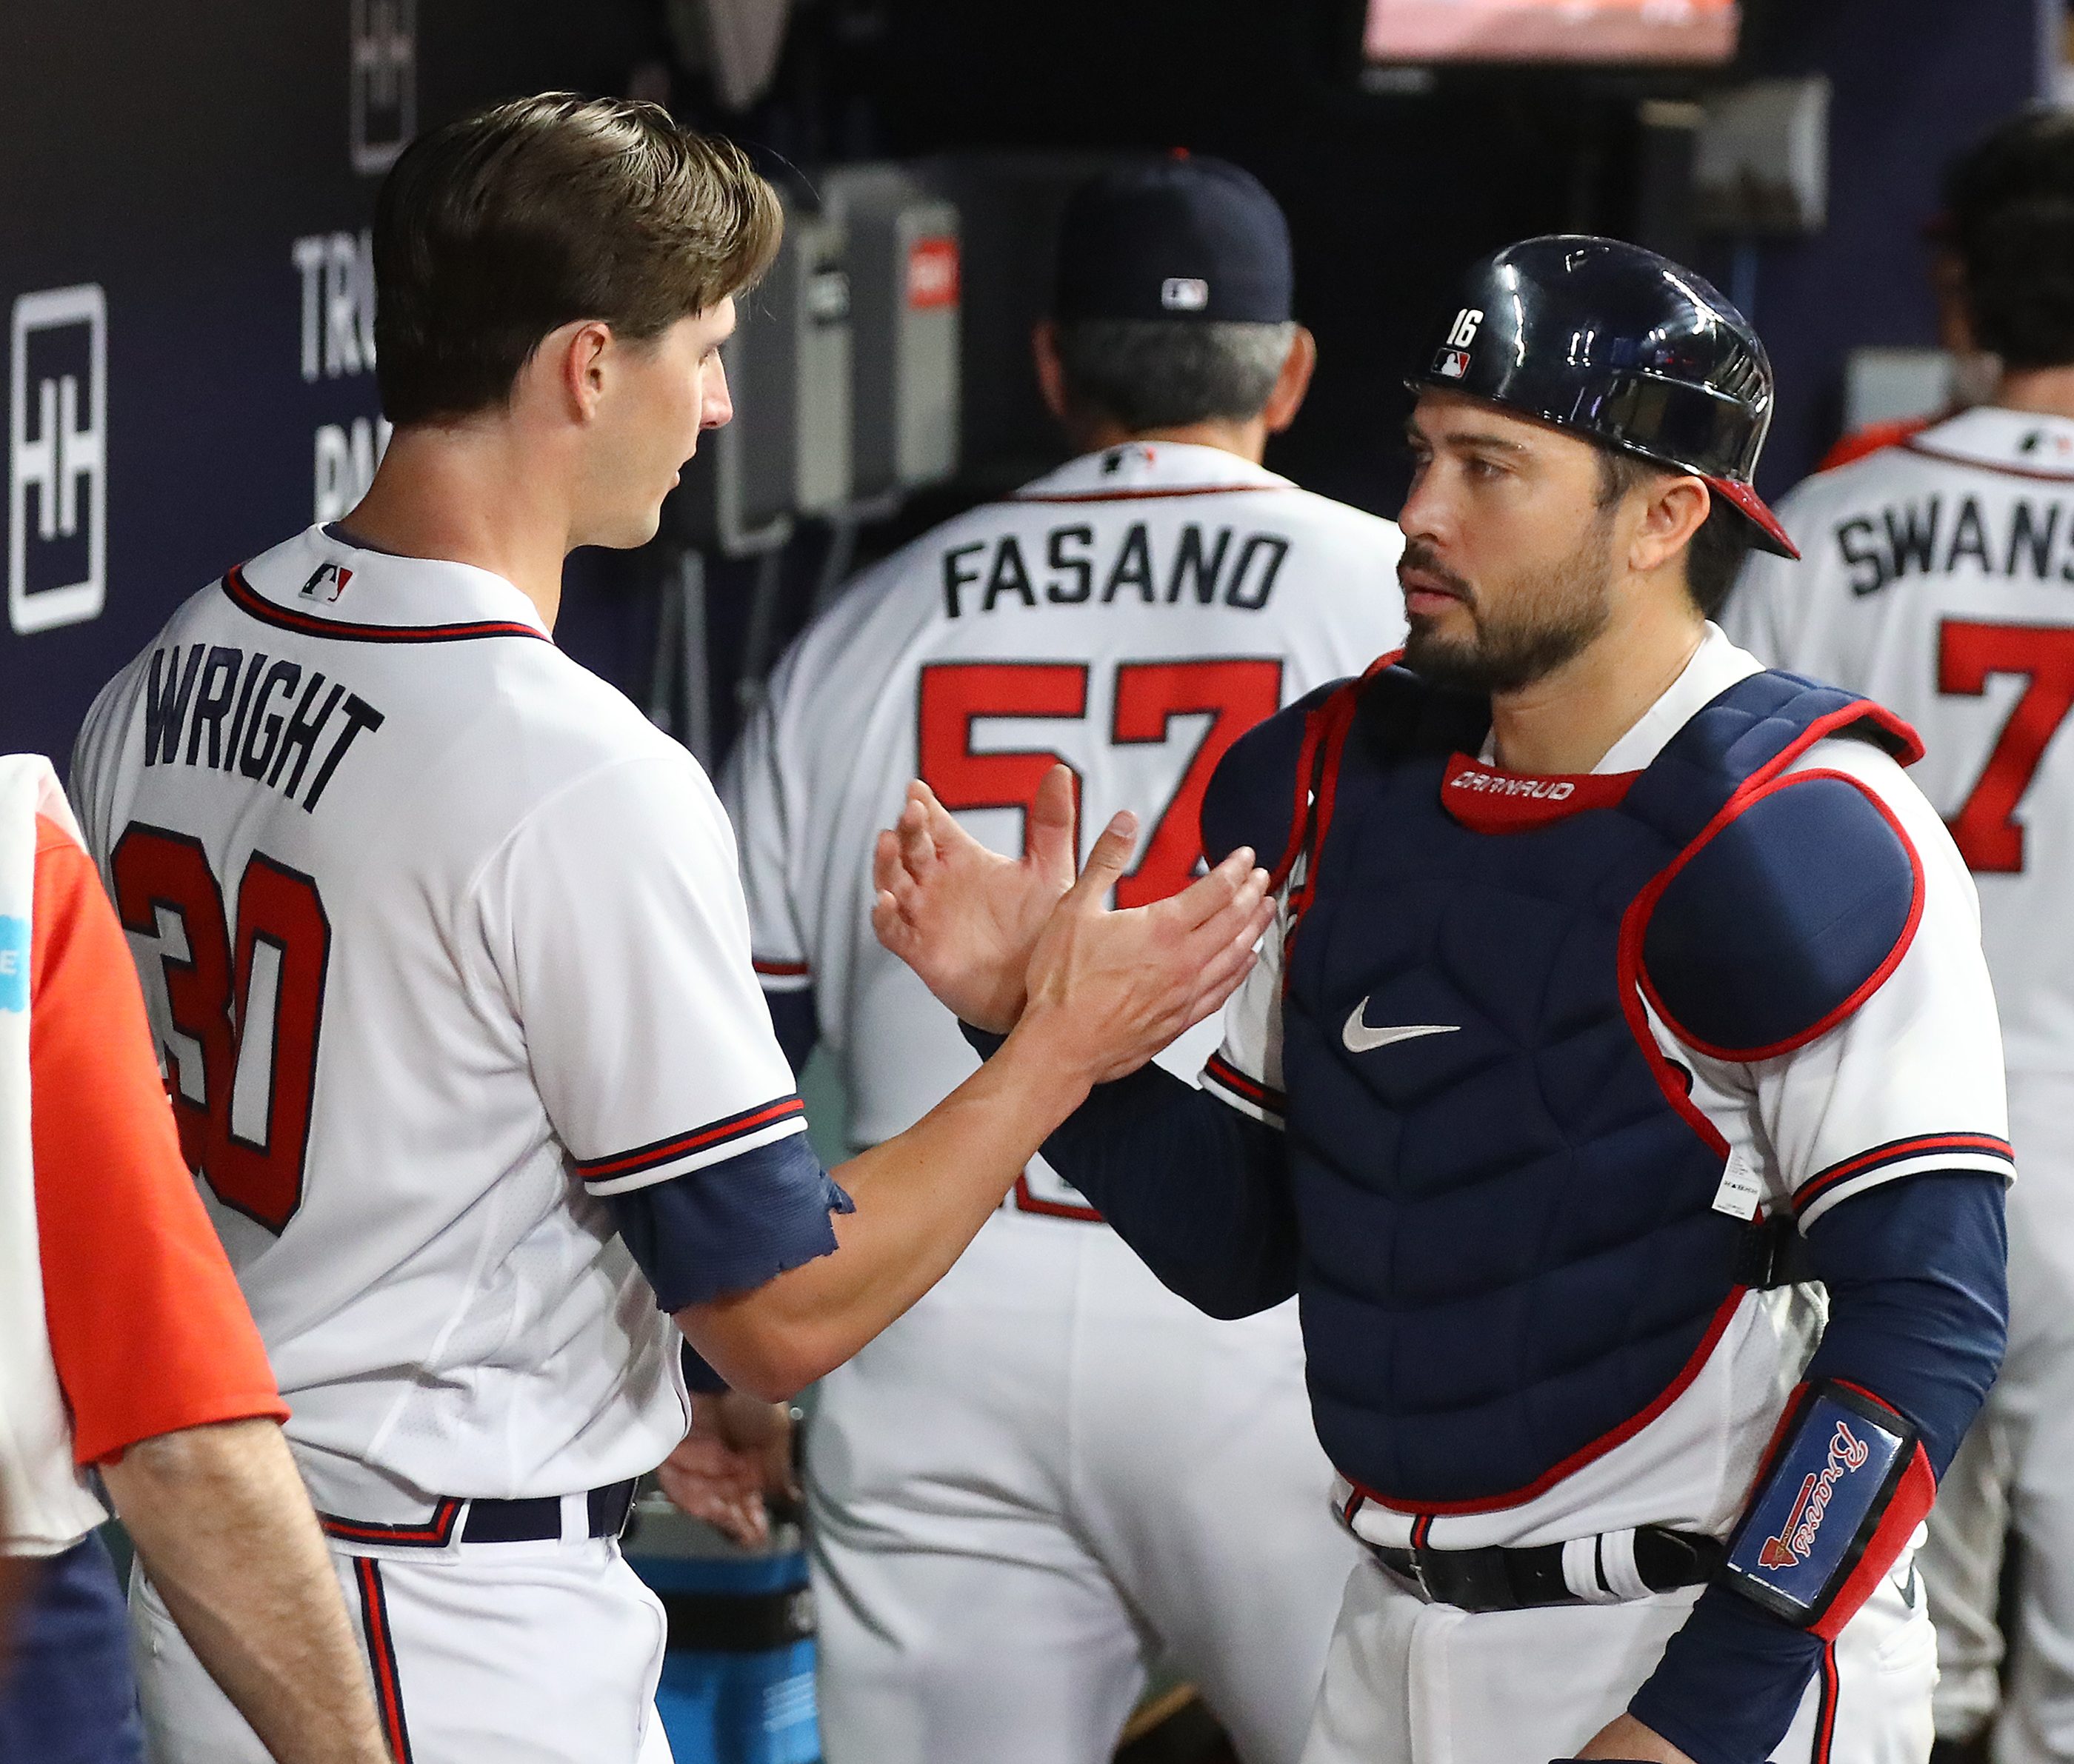 Jason Heyward gave Dansby Swanson perfect advice about leaving